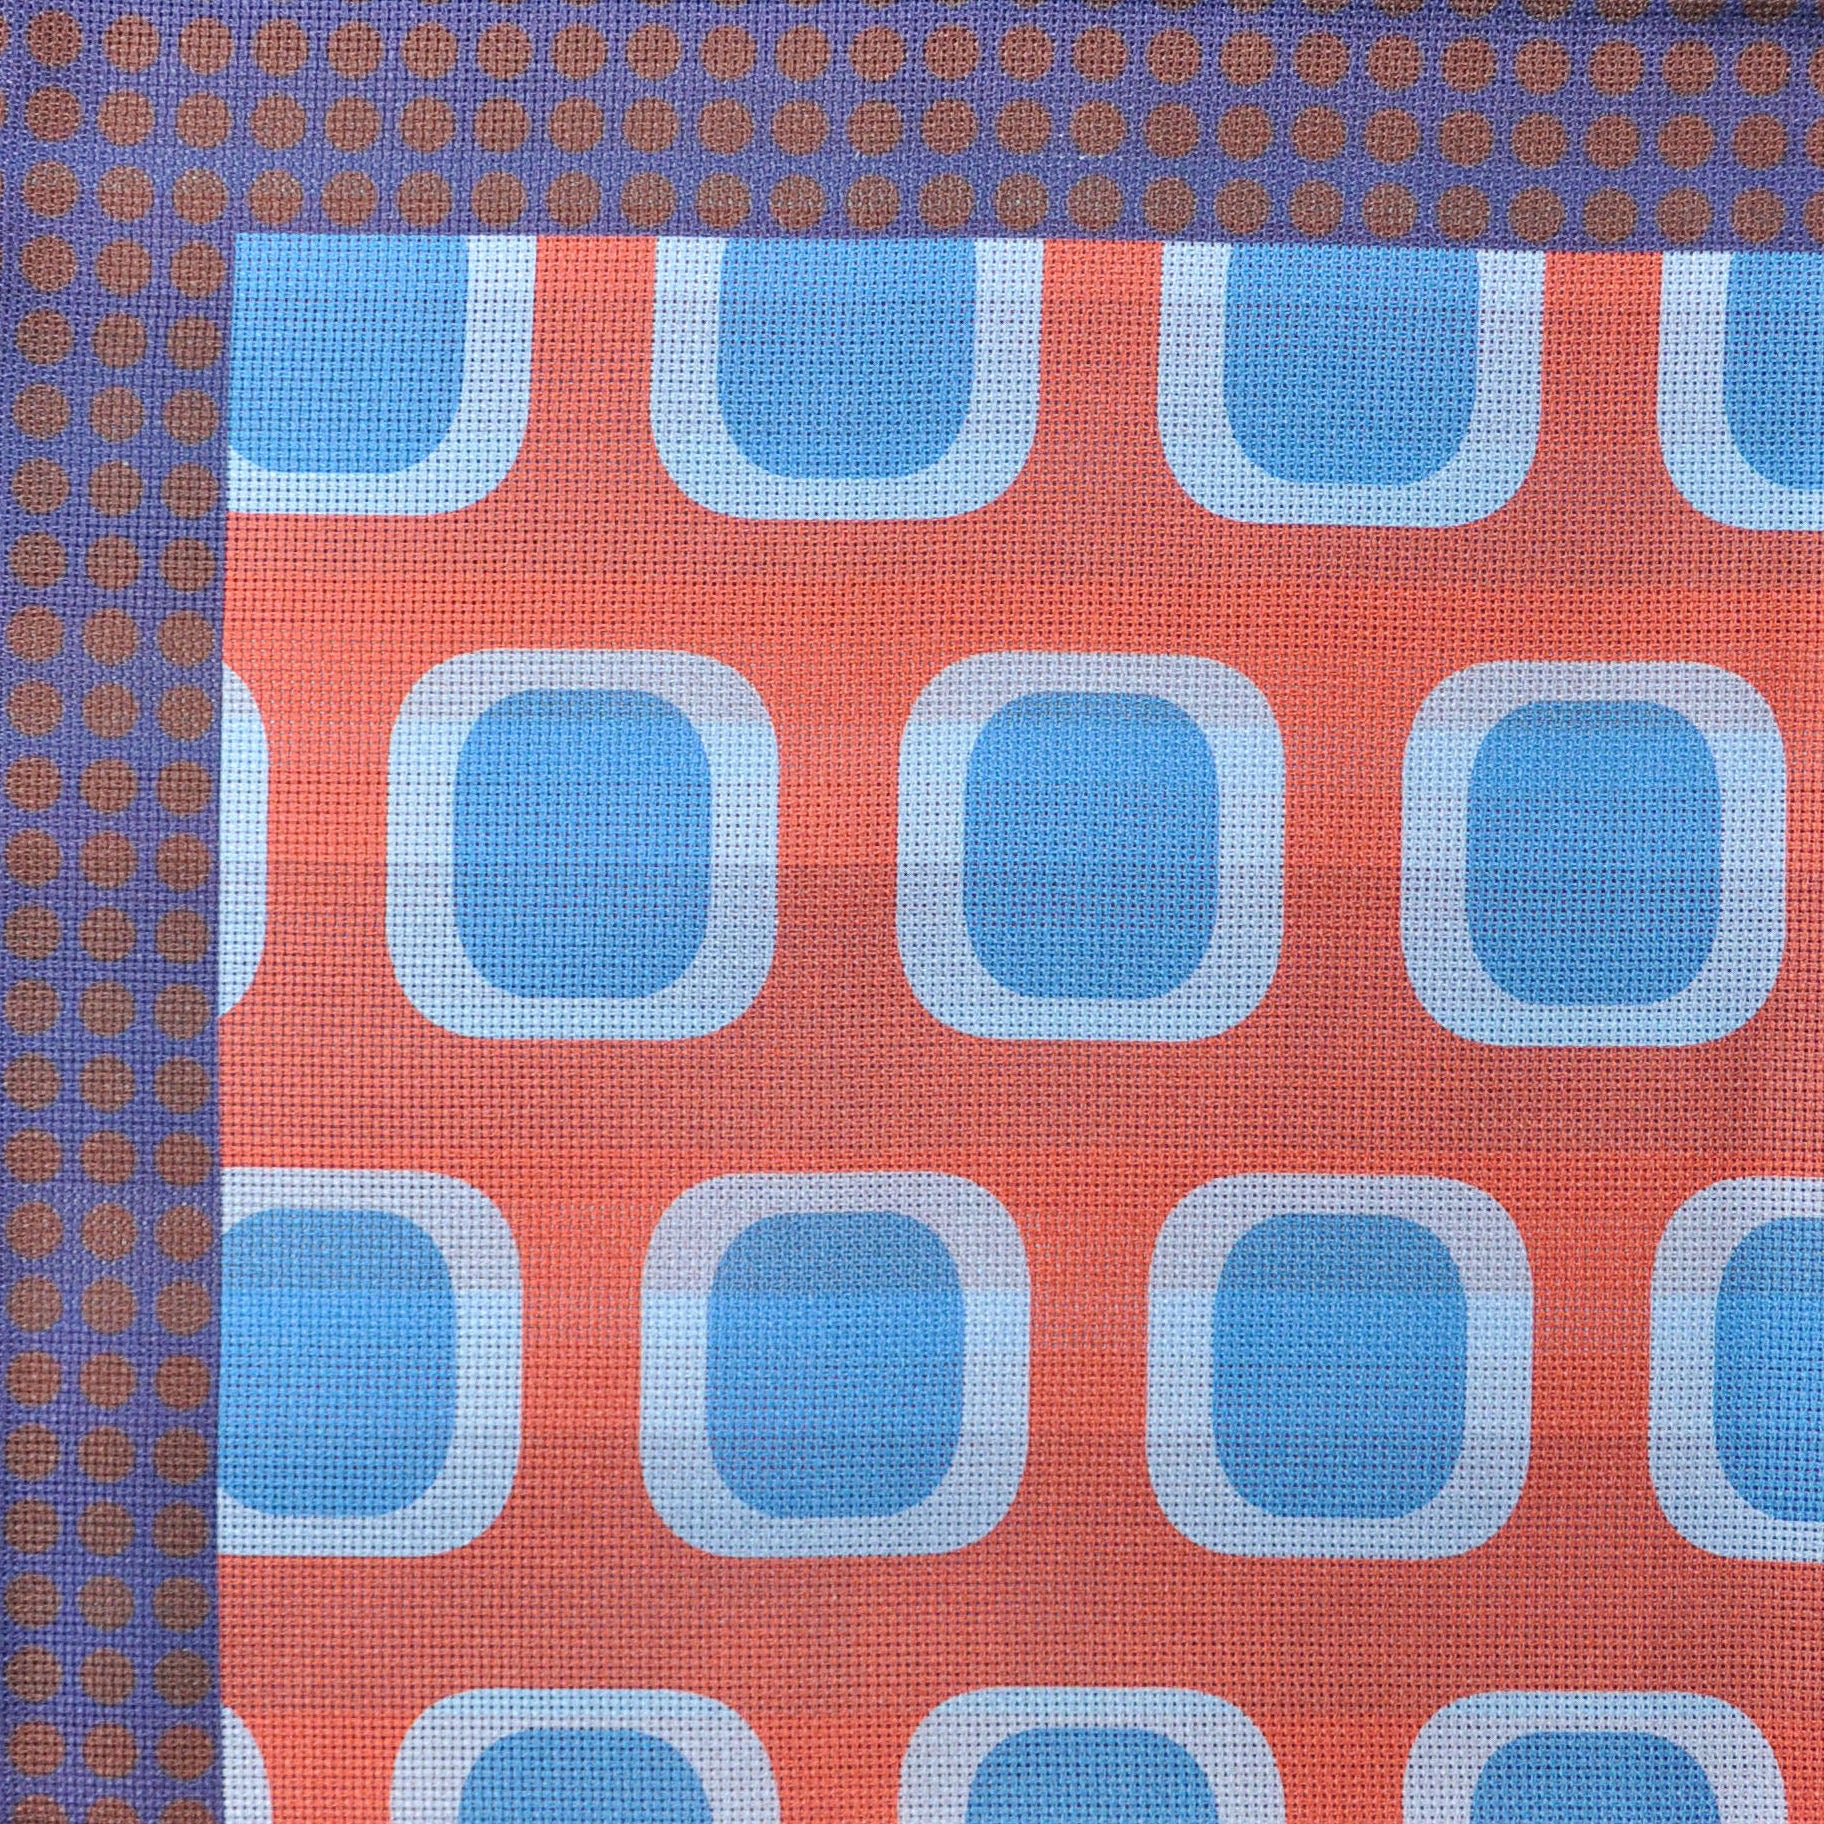 Dots, Geo's & Stripes Reversible Panama Silk Pocket Square in Navy, Blue & Peach Red